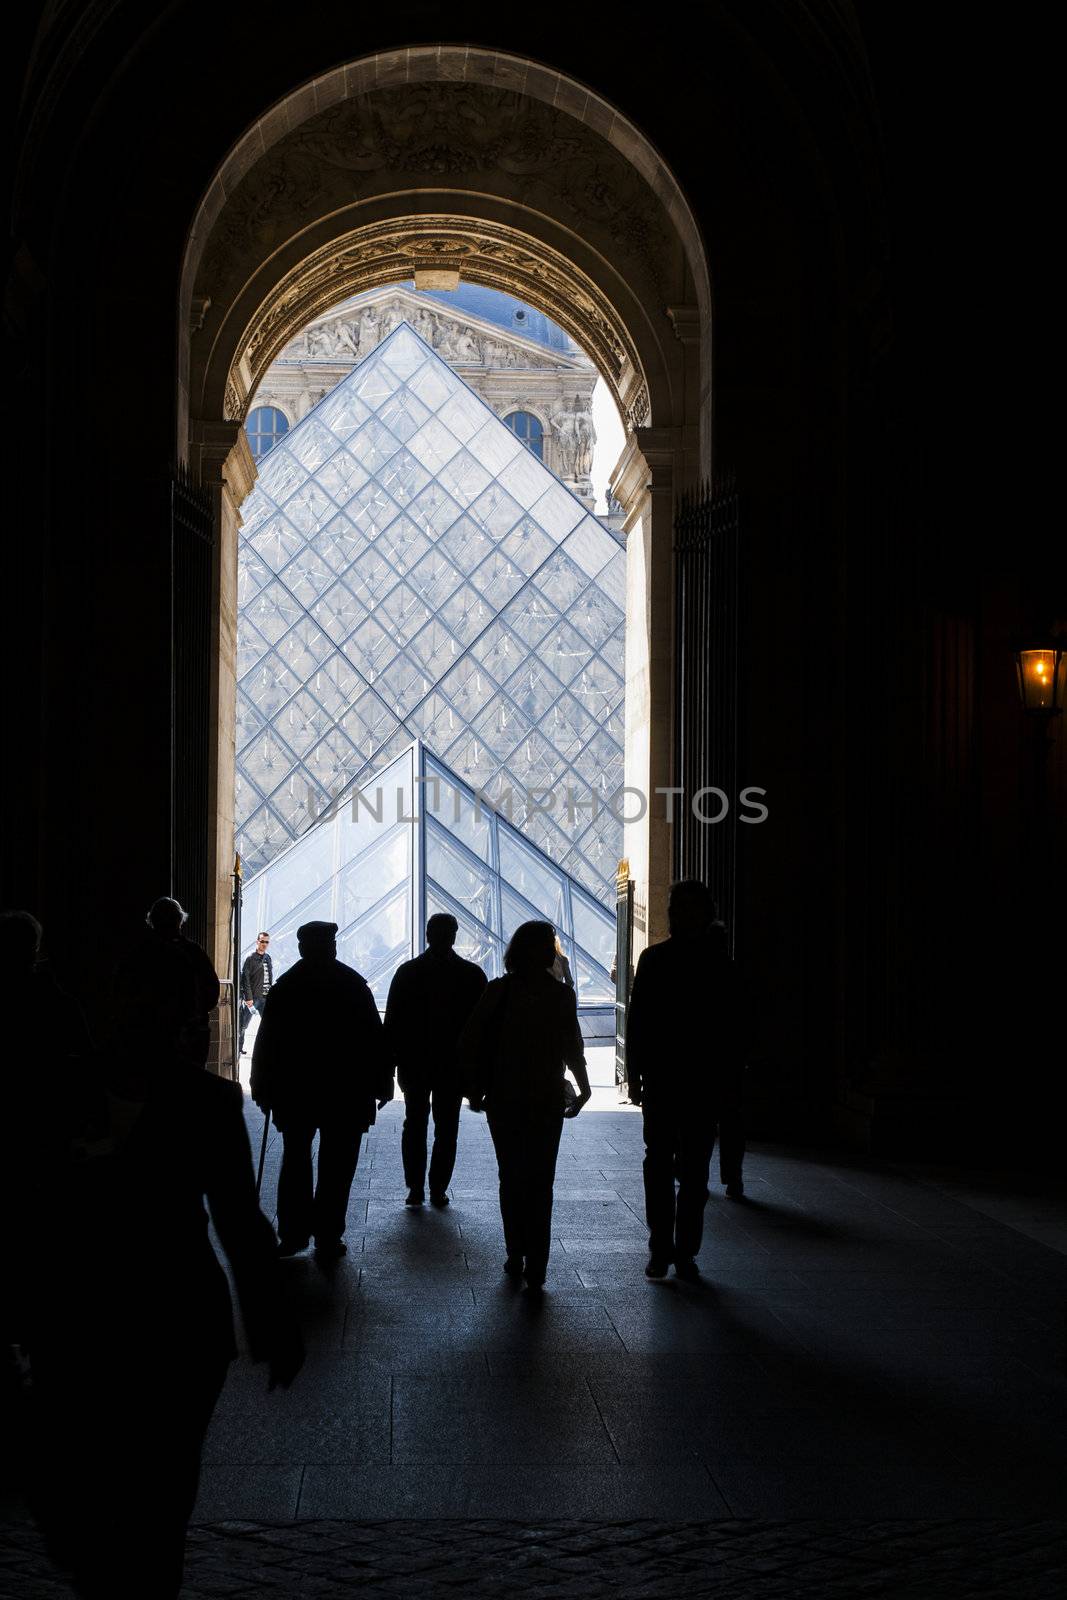 Glass Pyramid at the Louvre Museum by ints